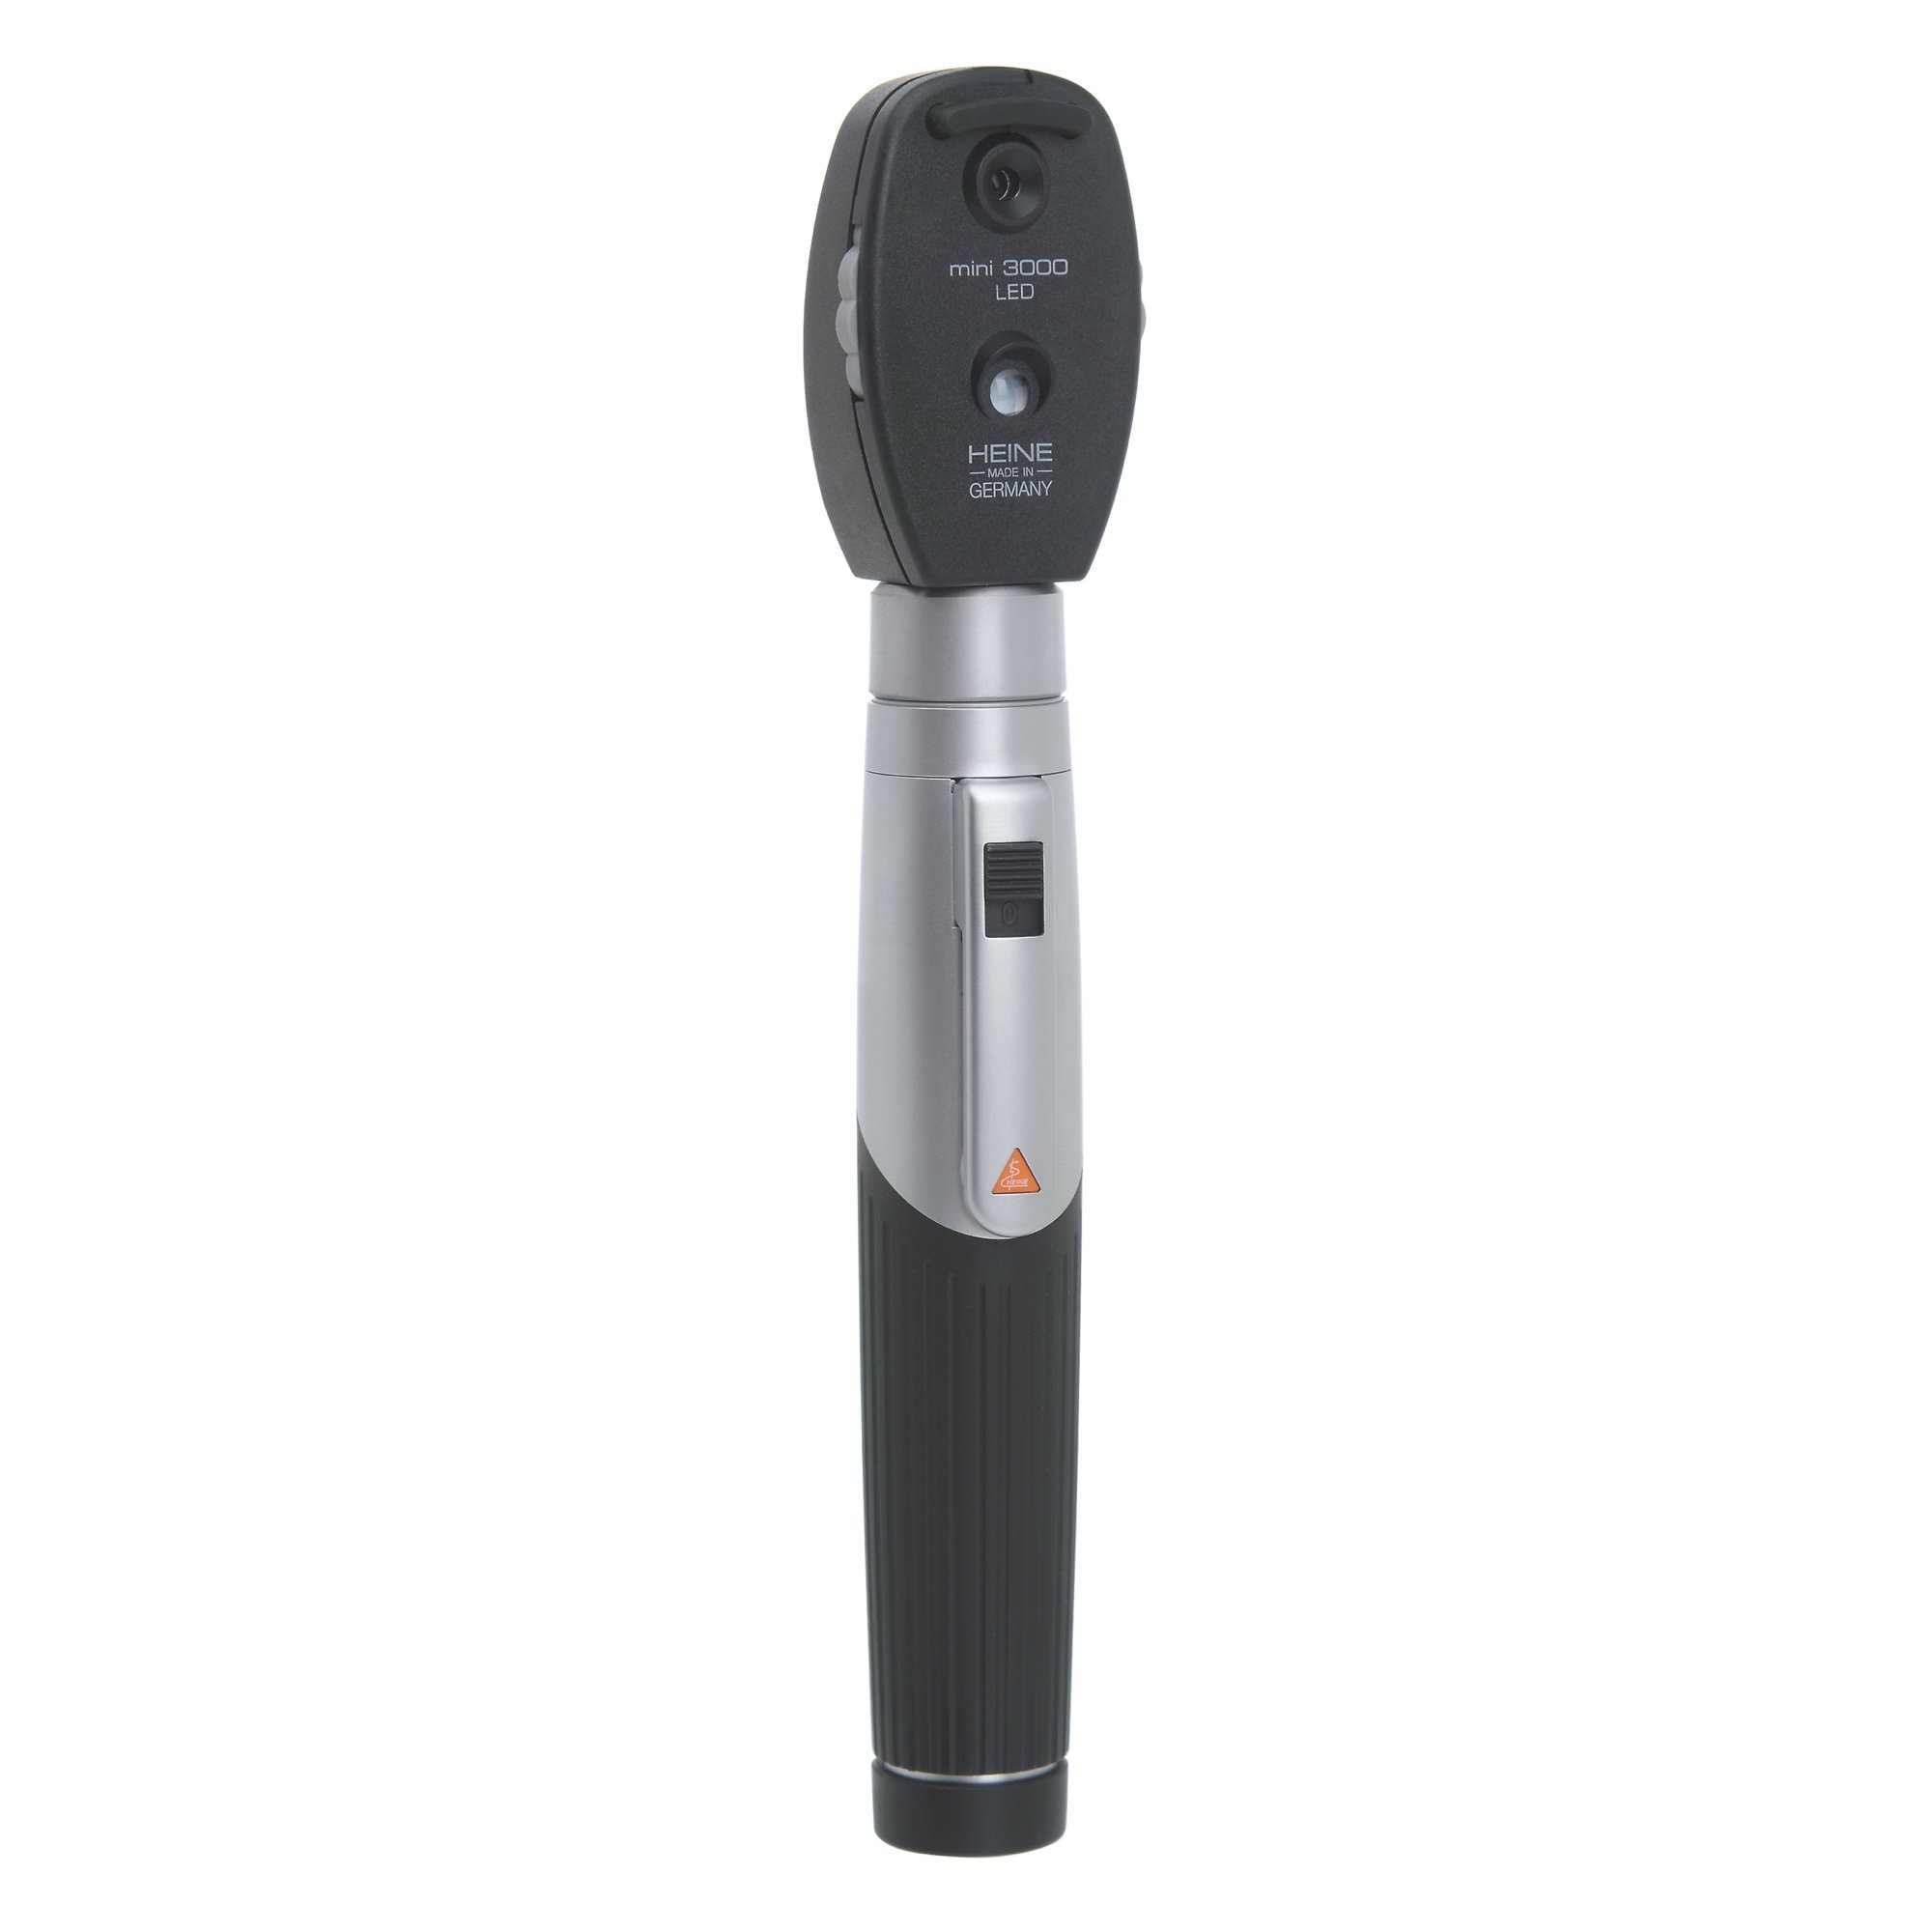 HEINE mini3000 LED Opthalmoscope with rechargeable handle 